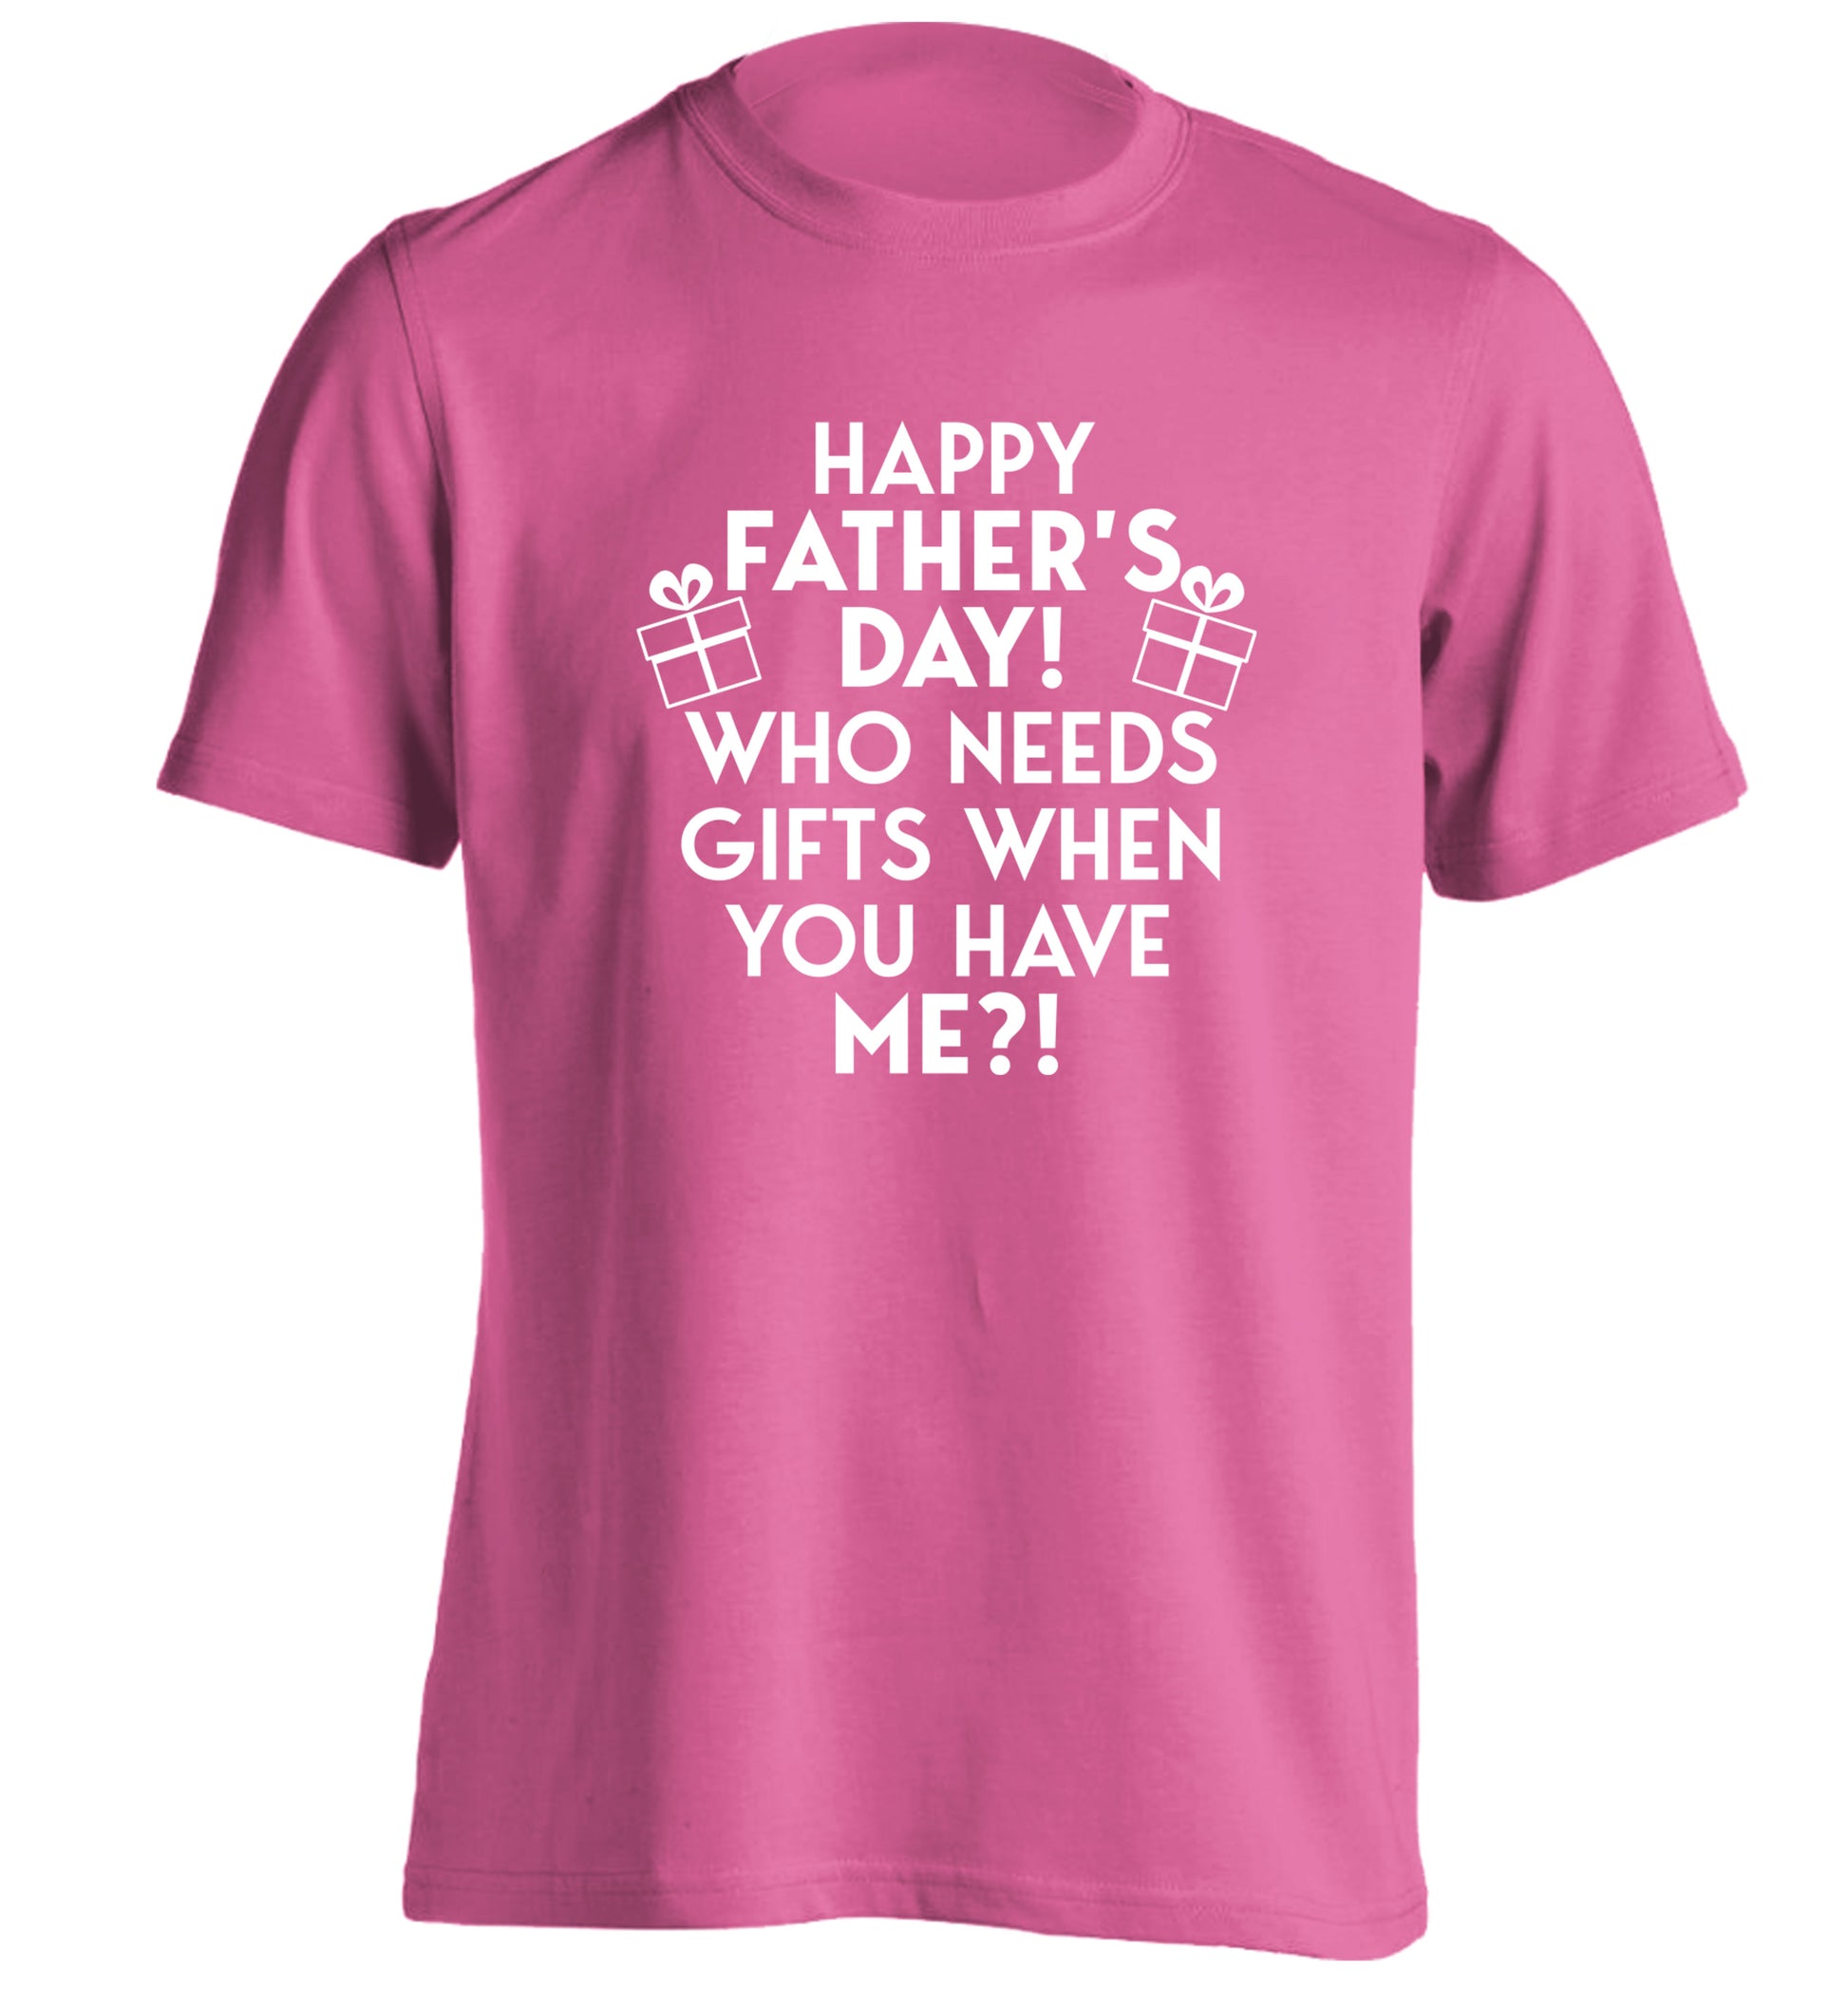 Happy Father's day, who needs a present when you have me adults unisex pink Tshirt 2XL